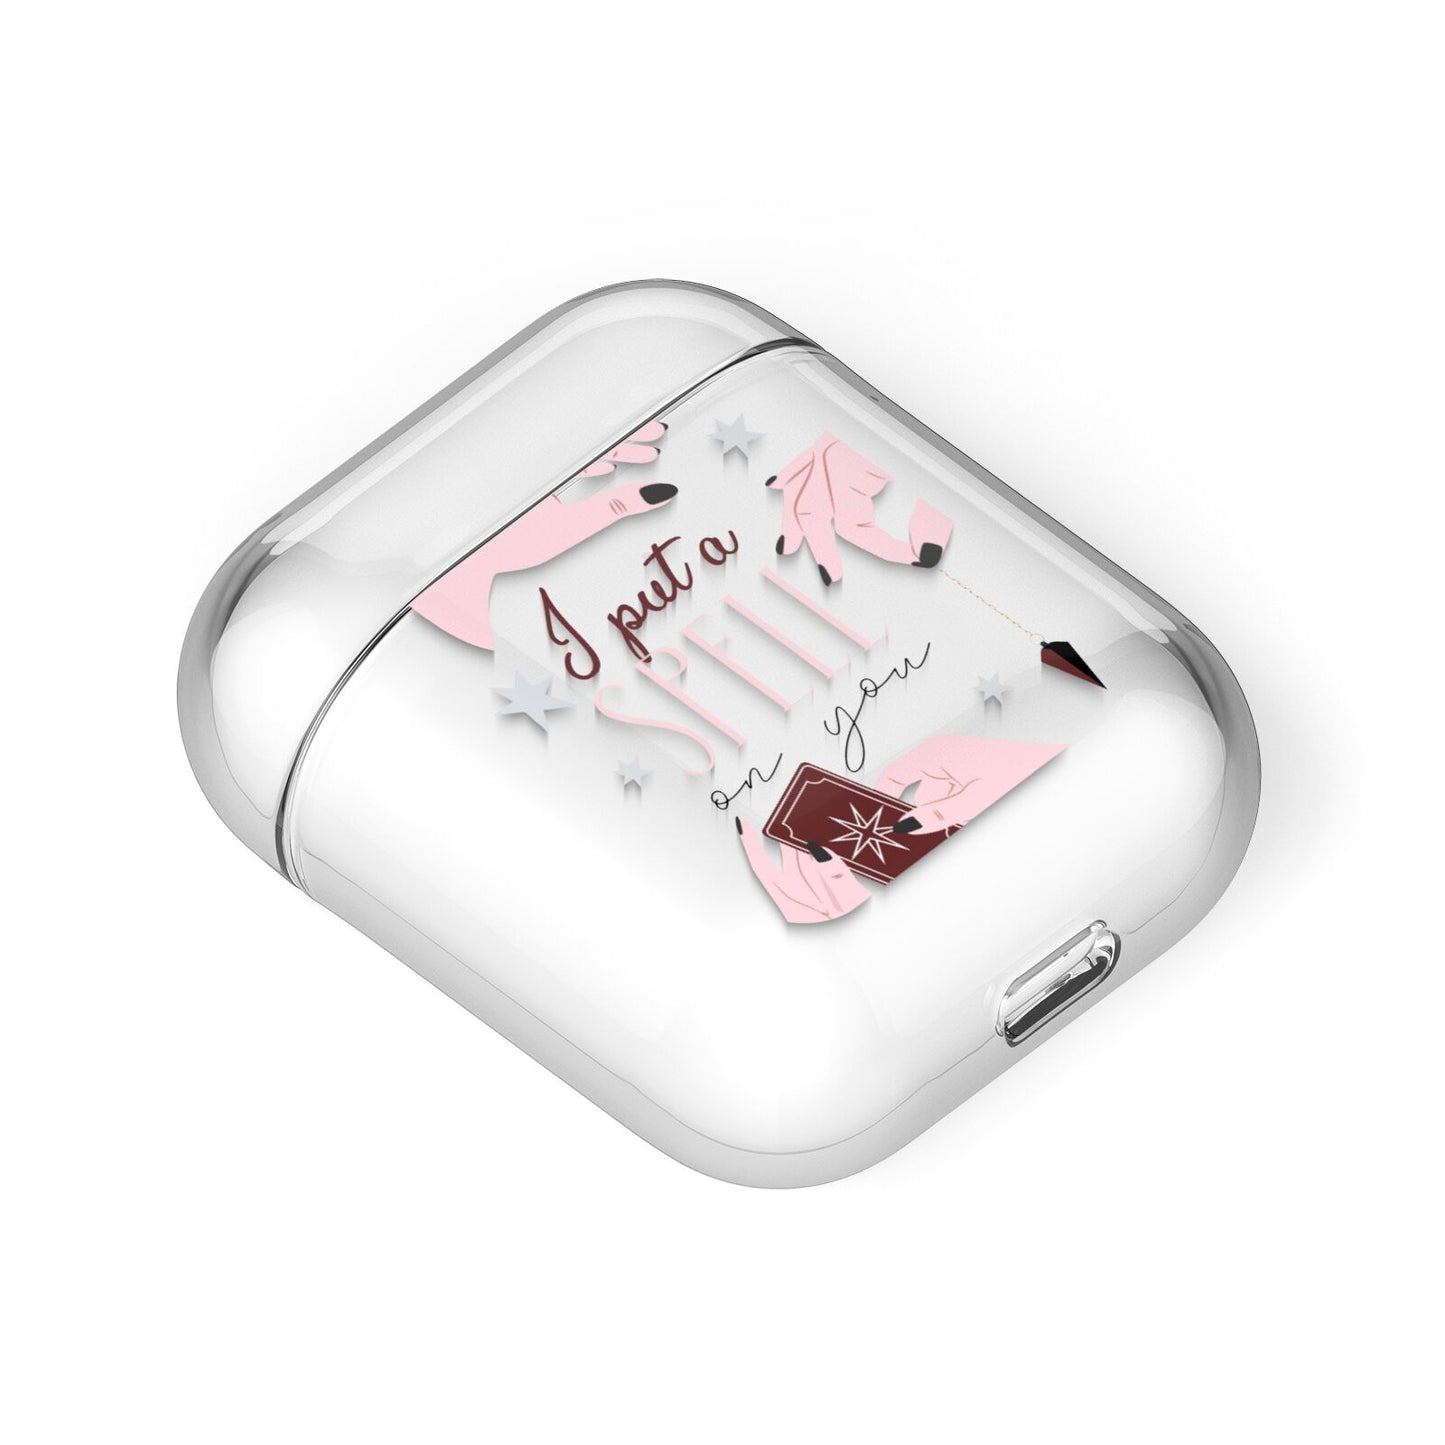 Witches Hands and Tarot Cards AirPods Case Laid Flat